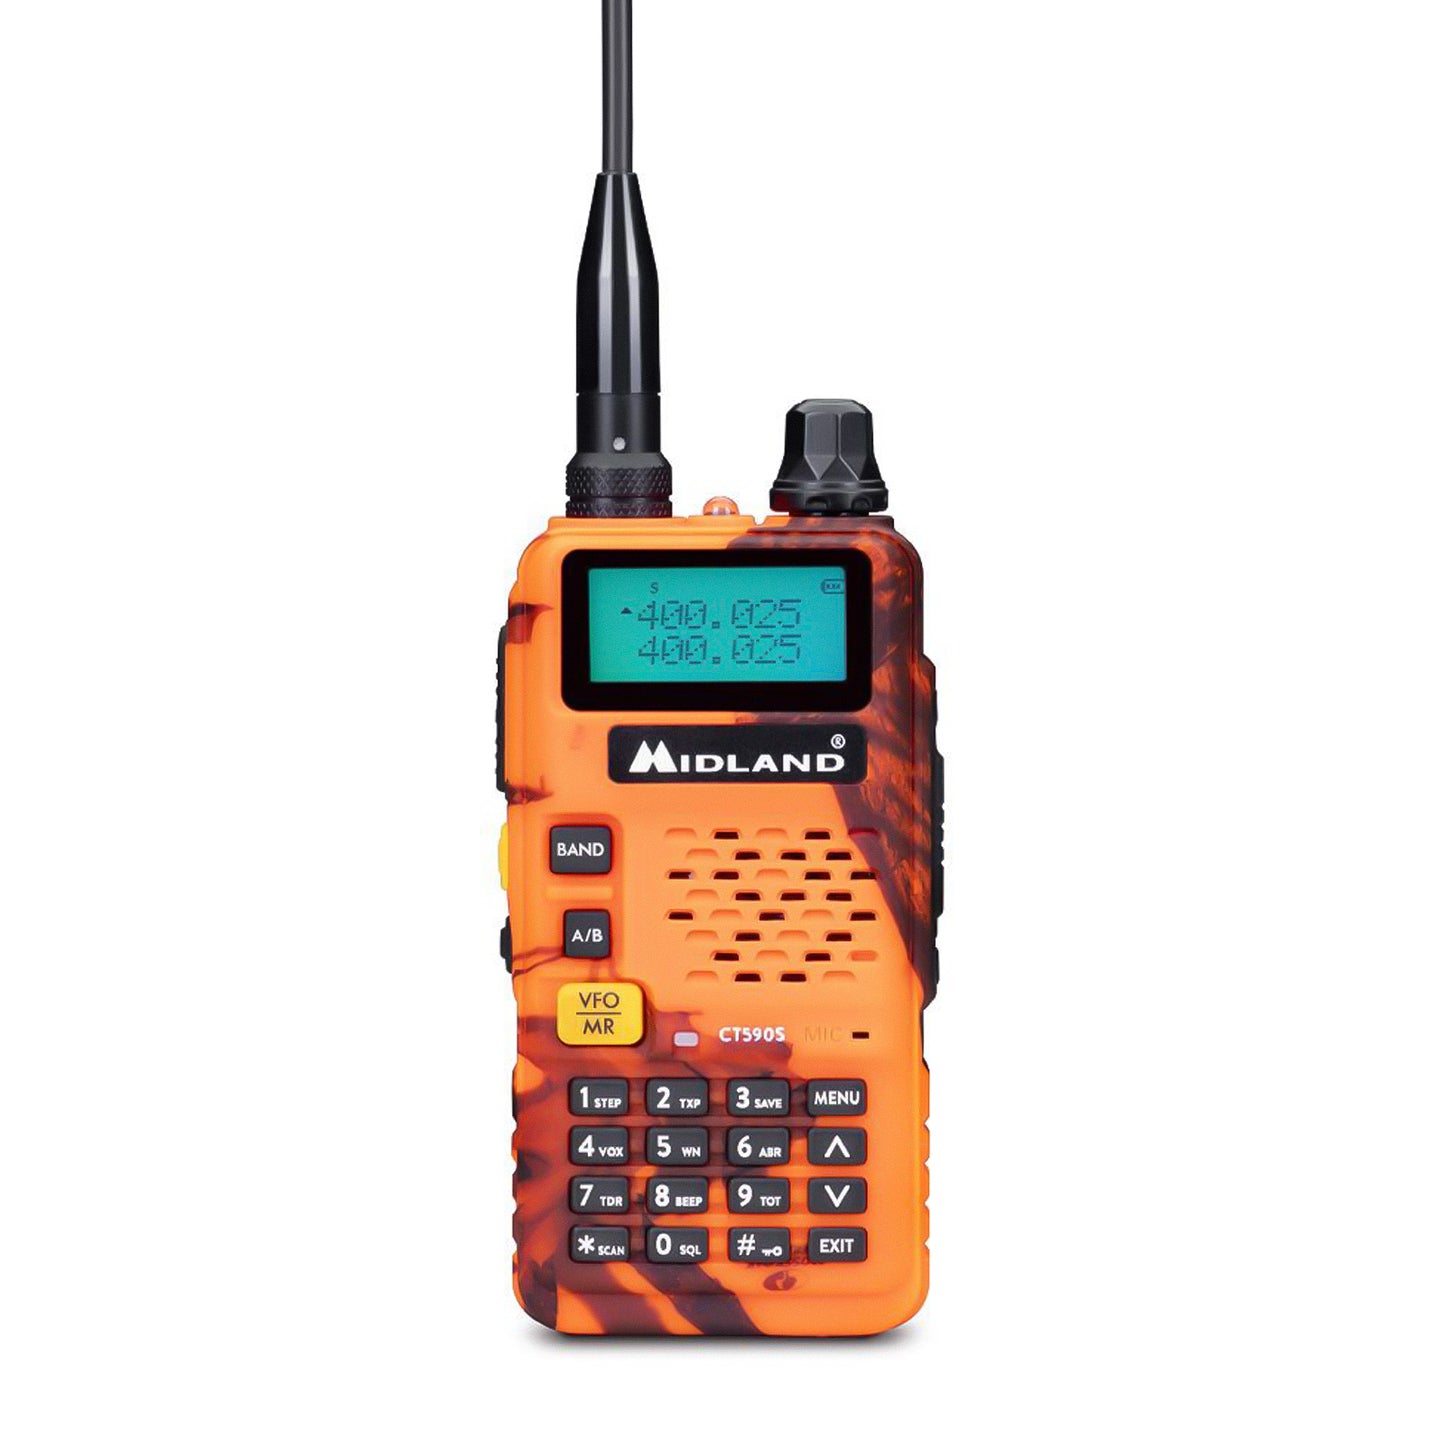 Midland CT590S BLAZE VHF/UHF dual band transceiver with LCD display, integrated 1500mAh battery, up to 128 storable channels with name attribution